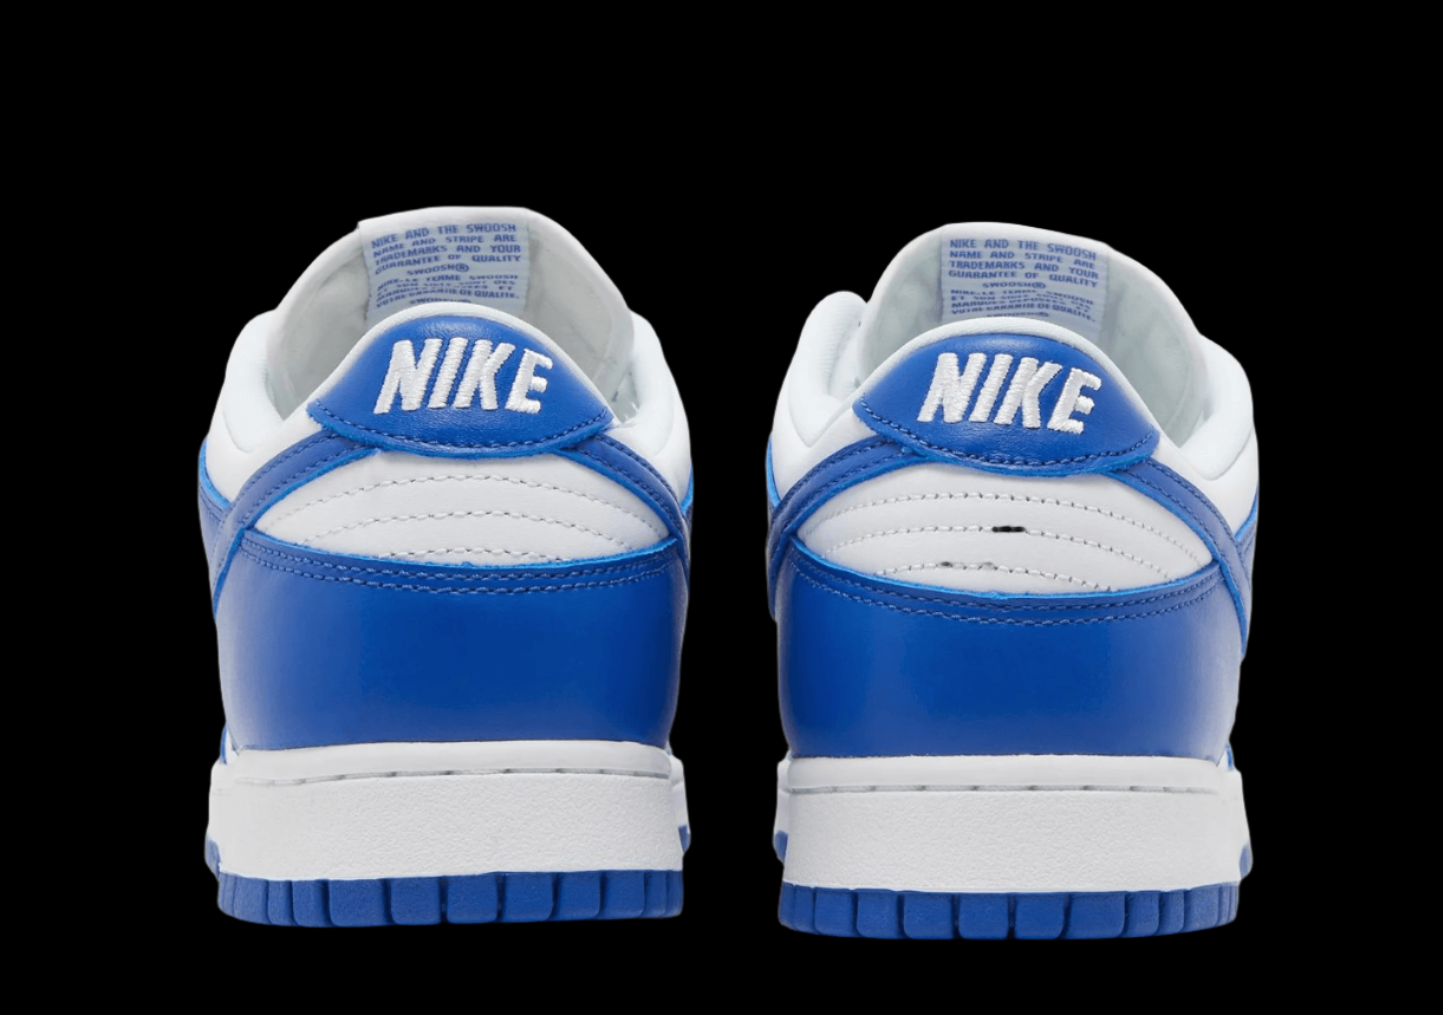 NIKE DUNK LOW RETRO SP 'KENTUCKY' - The Flaire